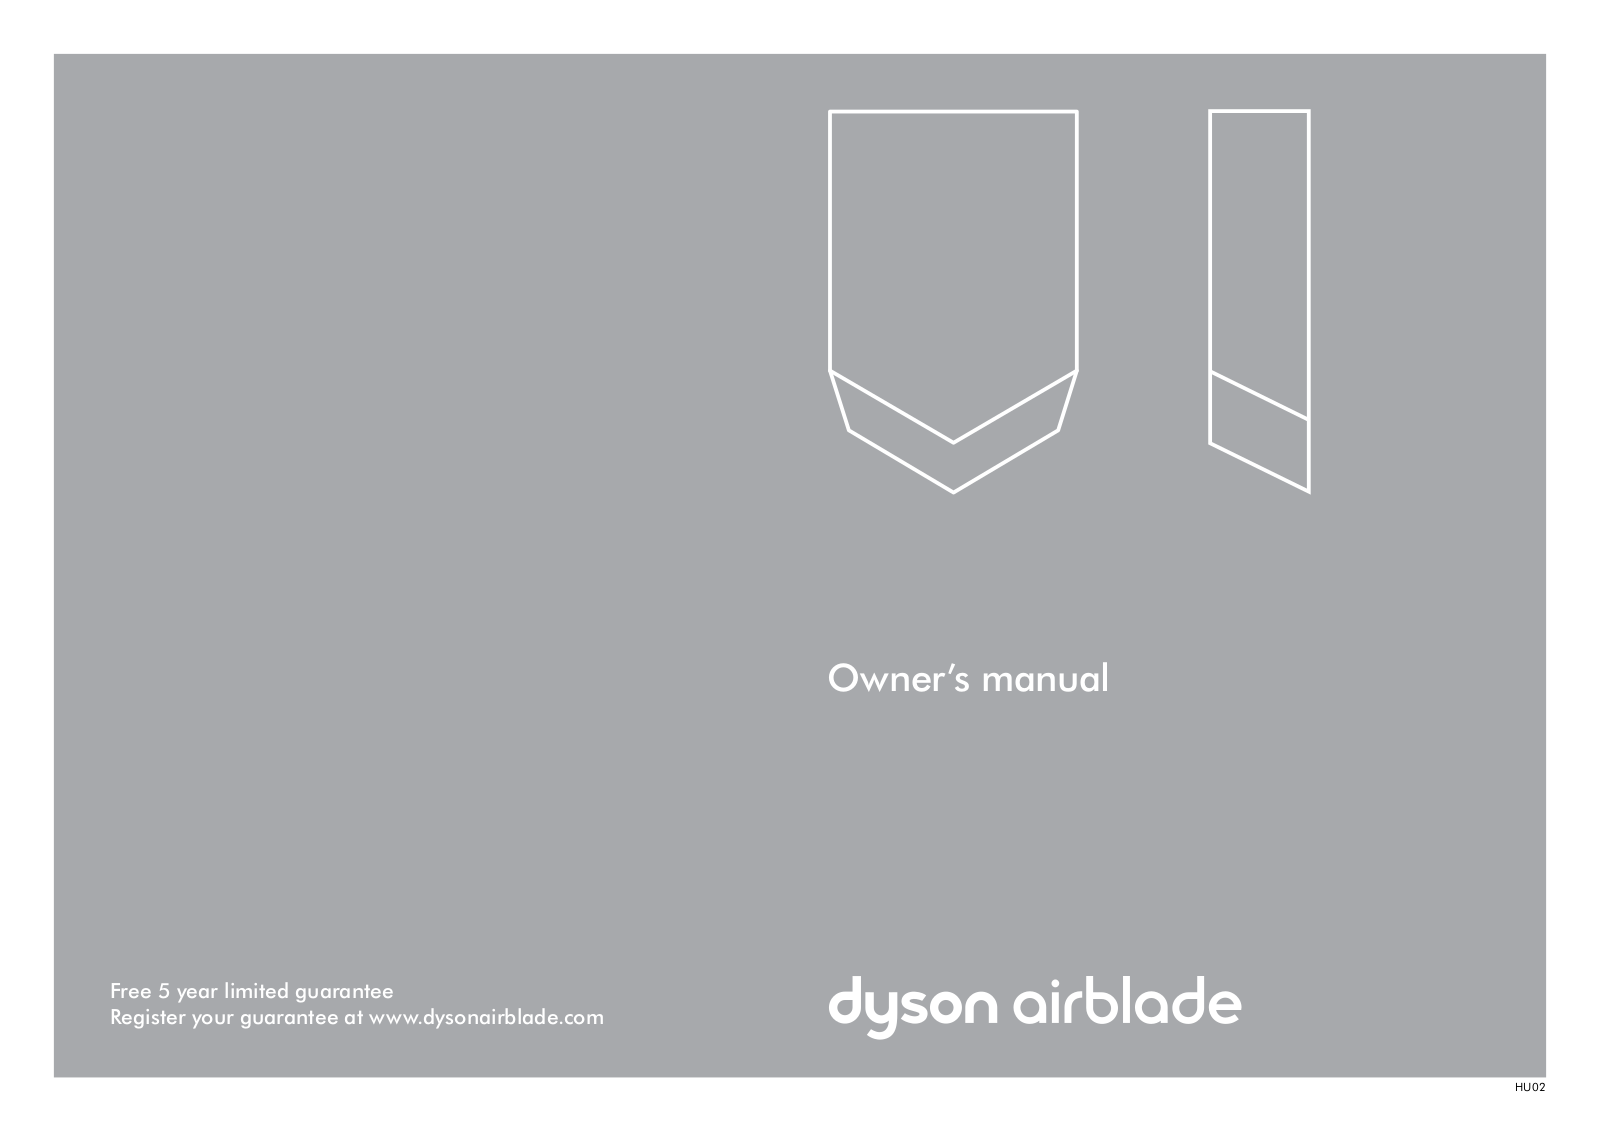 Dyson Airblade operation manual